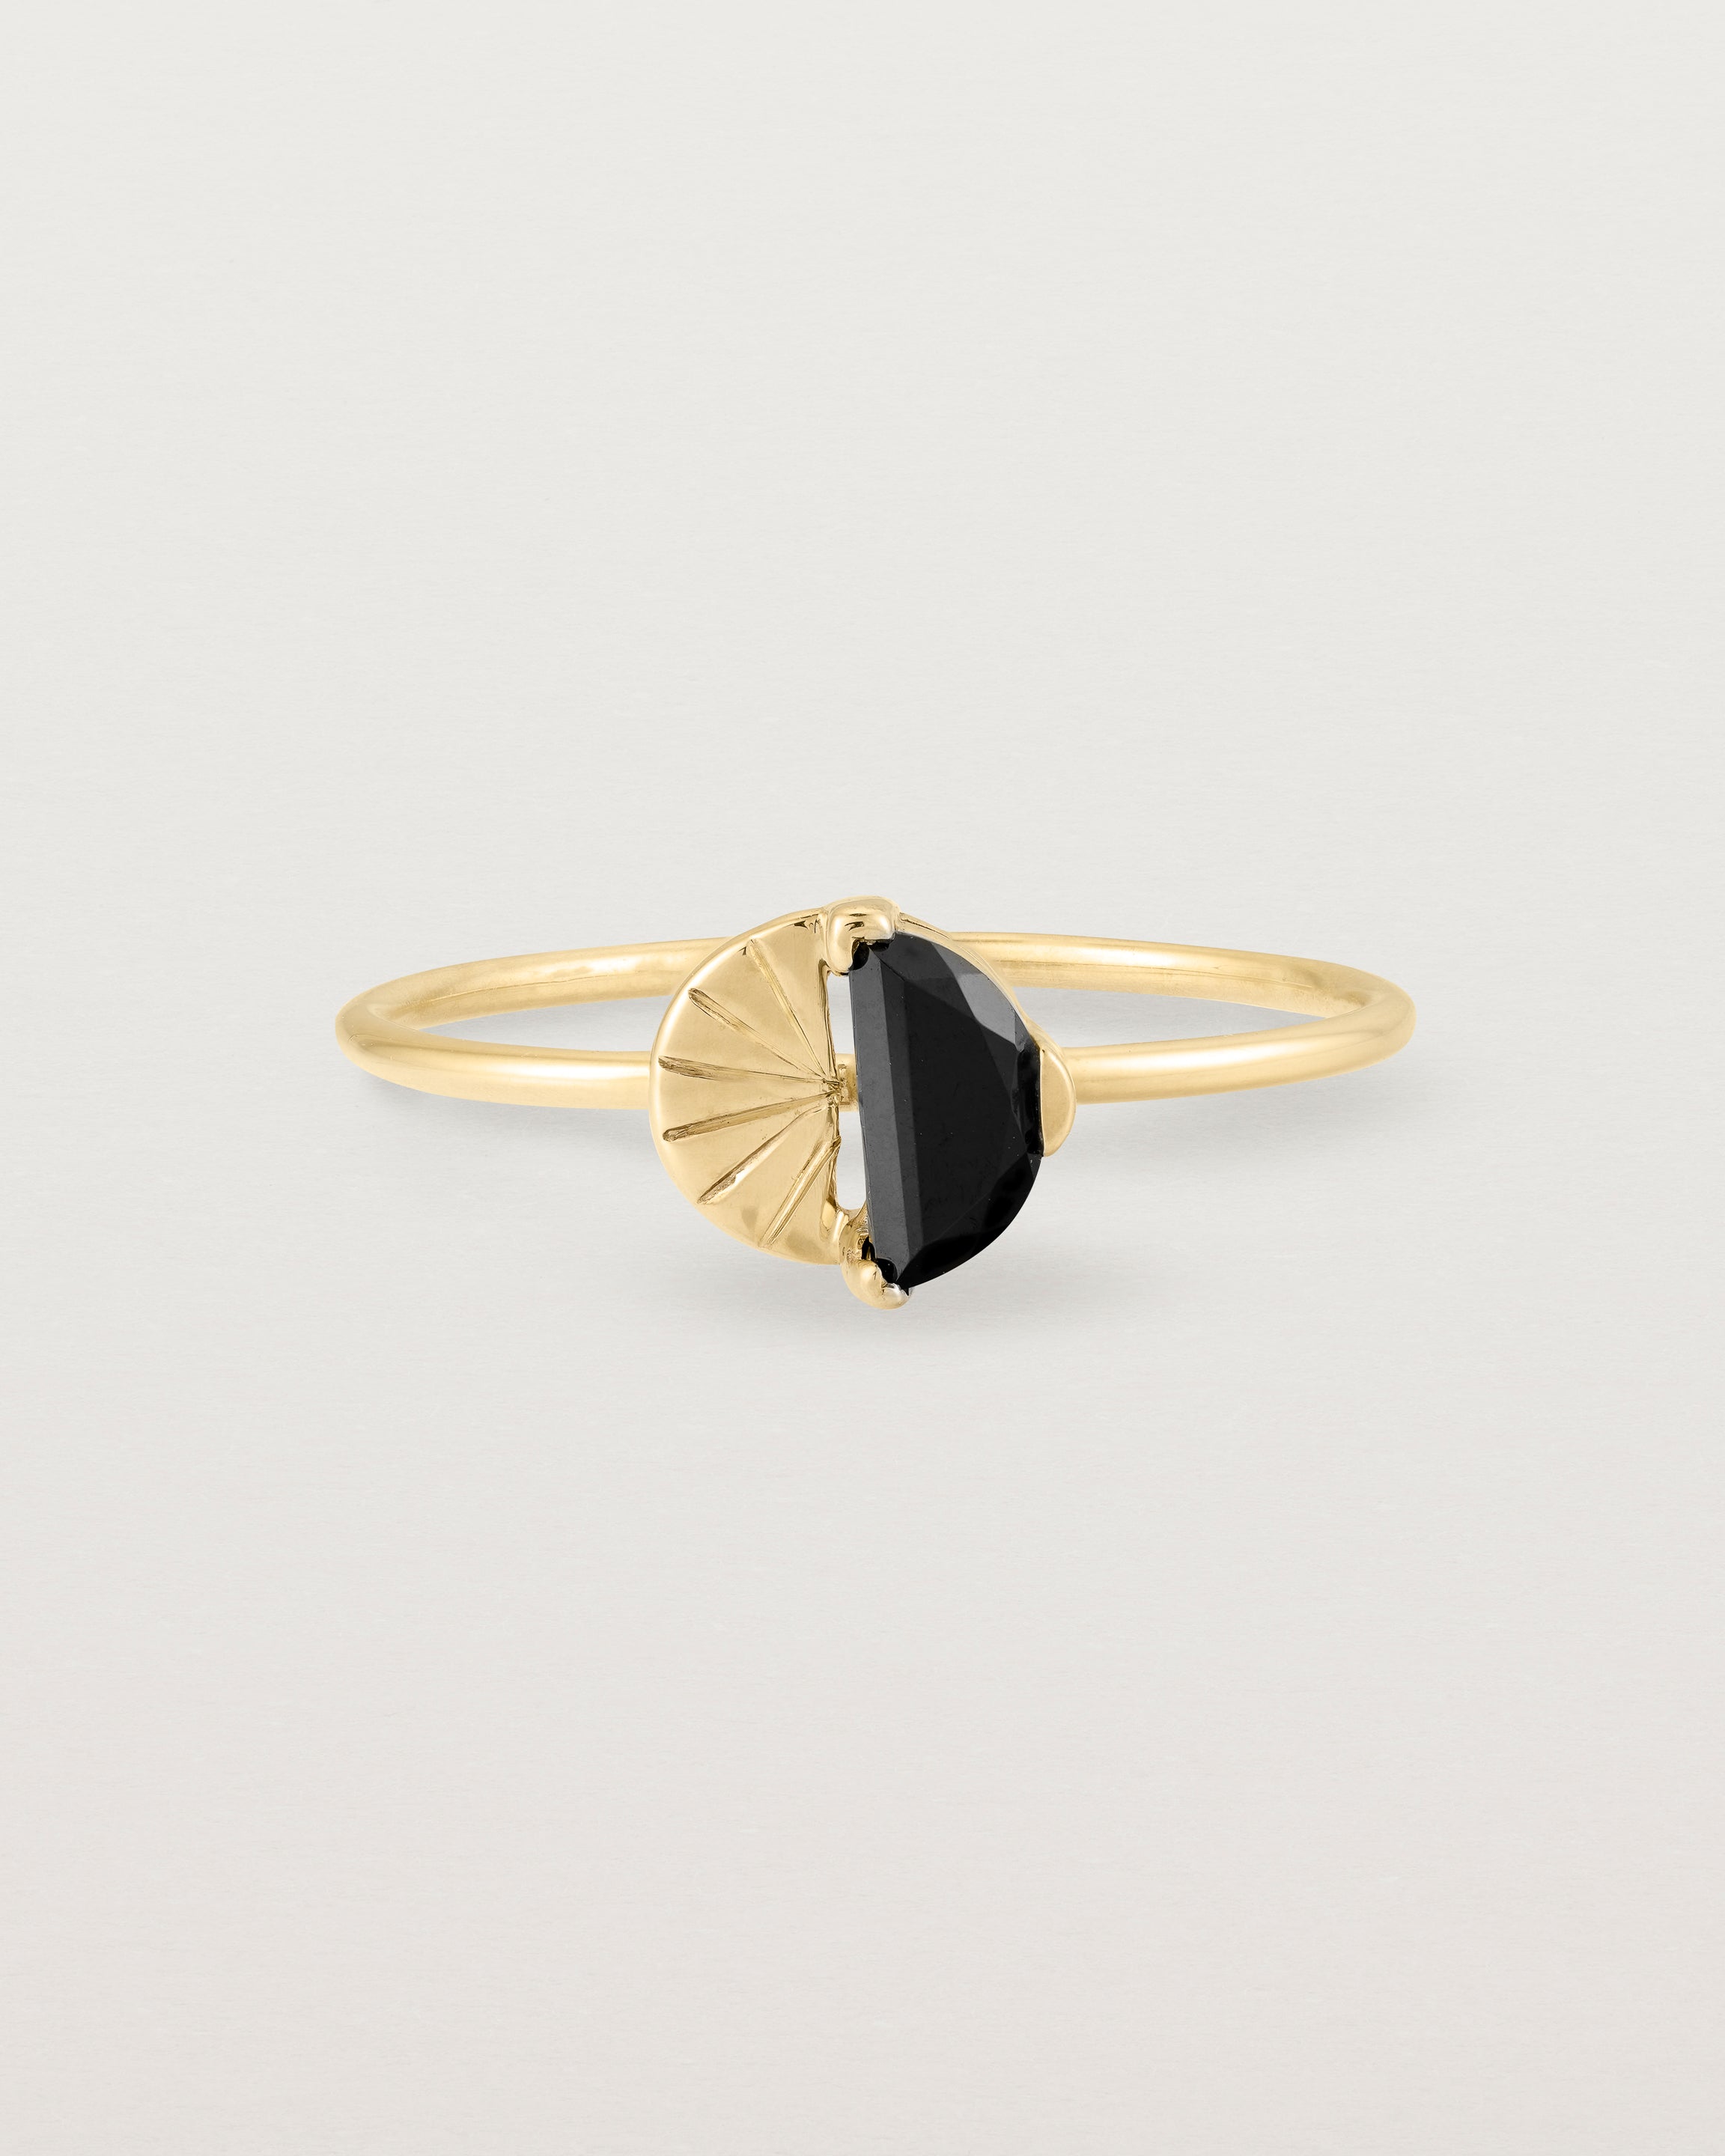 Front view of the Jia Stone Ring | Black Spinel in Yellow Gold.